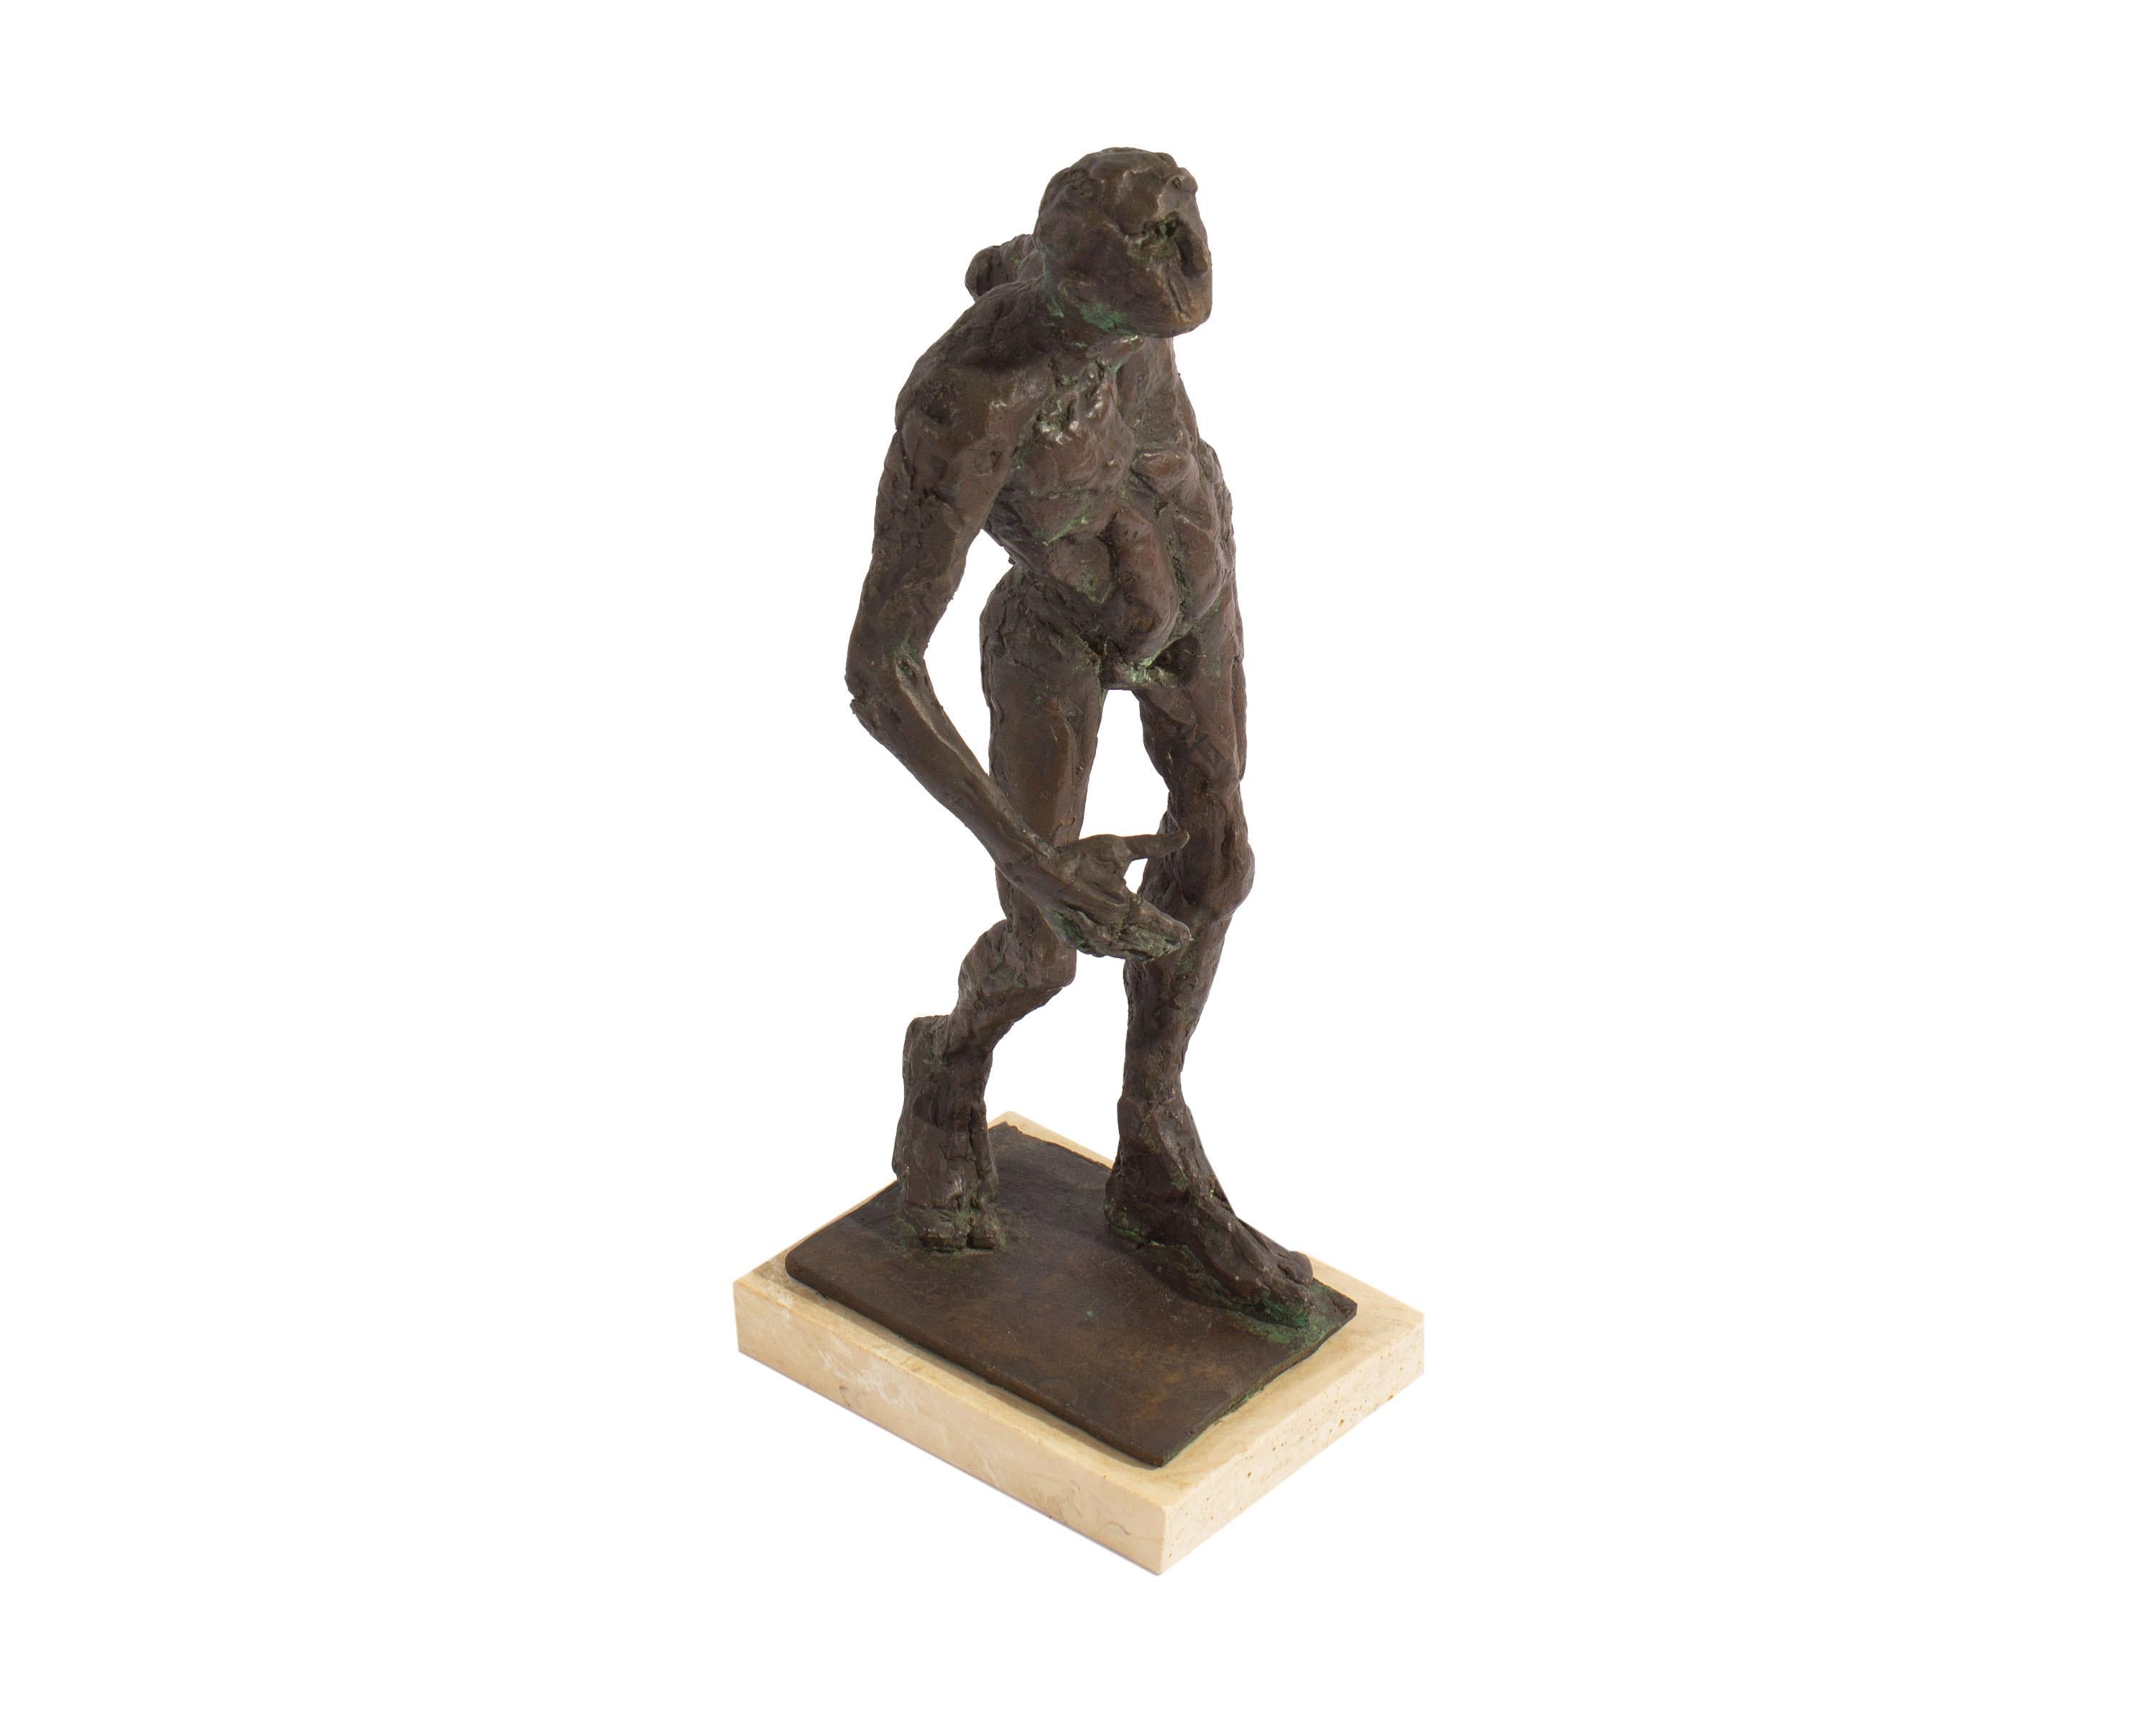 A 1973 abstract bronze sculpture of a man by American artist George De Groat (1917-1995). Signed and dated 